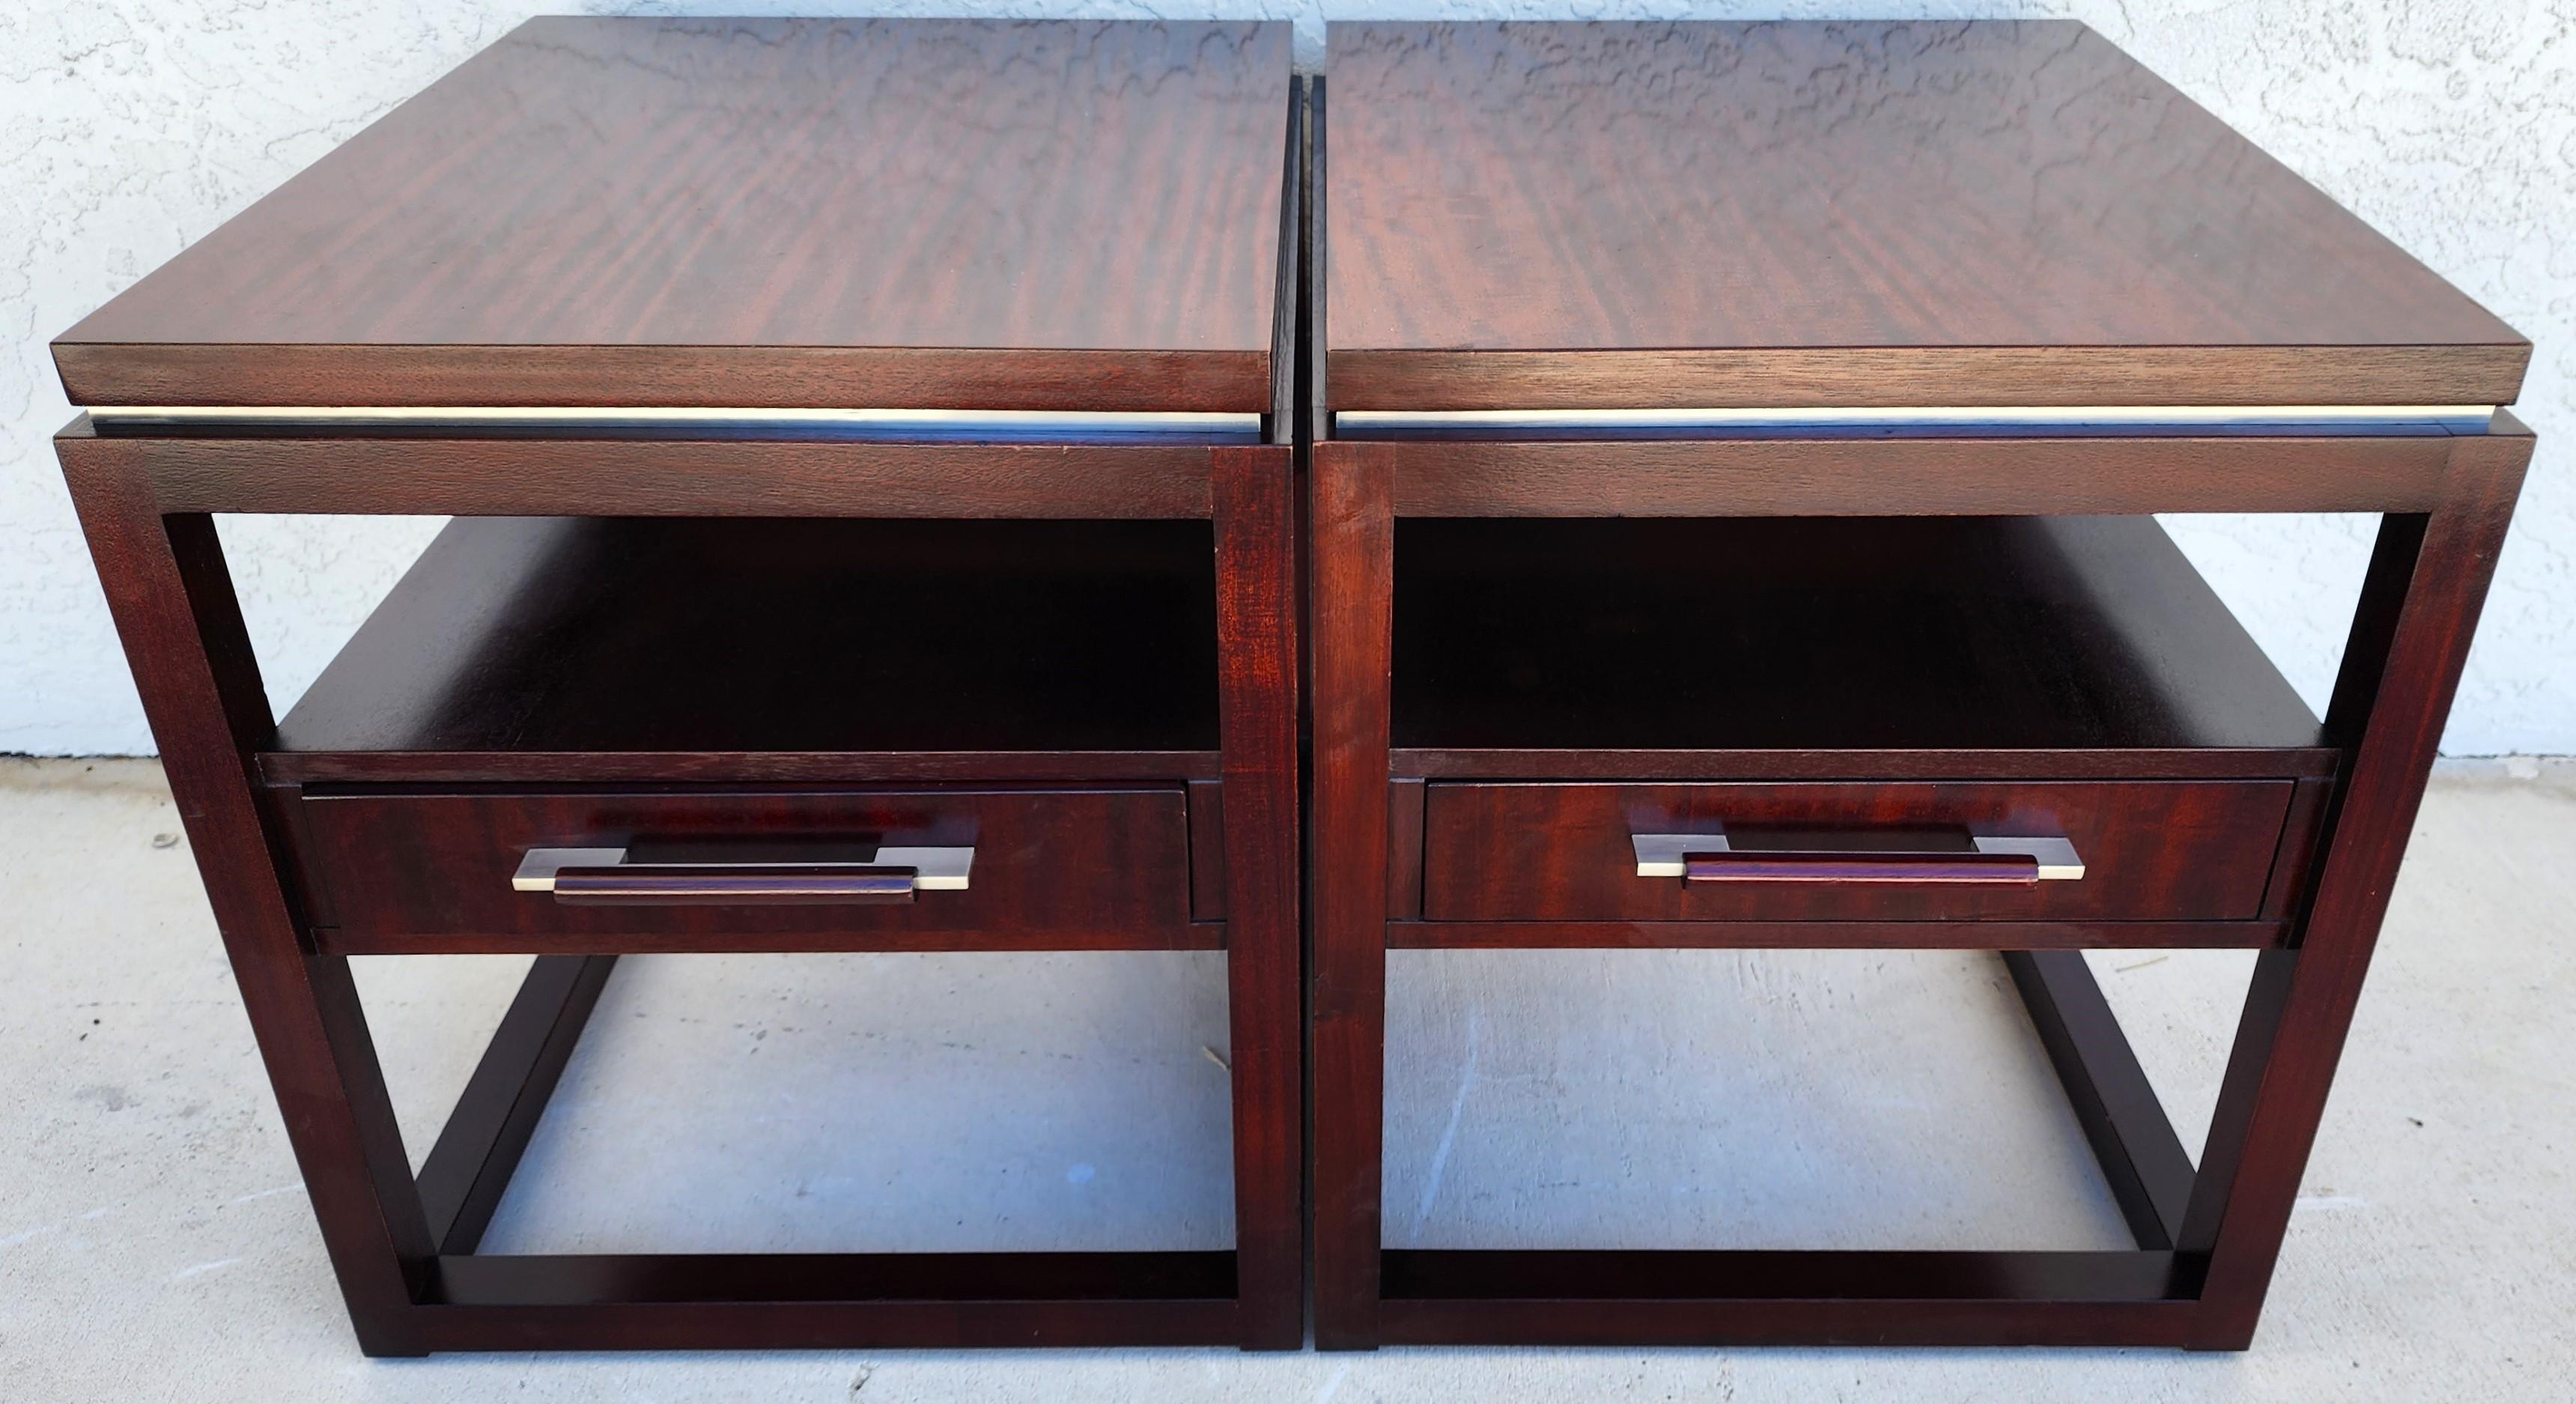 For FULL item description click on CONTINUE READING at the bottom of this page.

Offering One Of Our Recent Palm Beach Estate Fine Furniture Acquisitions Of A
Pair of Mid-Century Modern Nightstands Side End Tables by HENREDON

Approximate